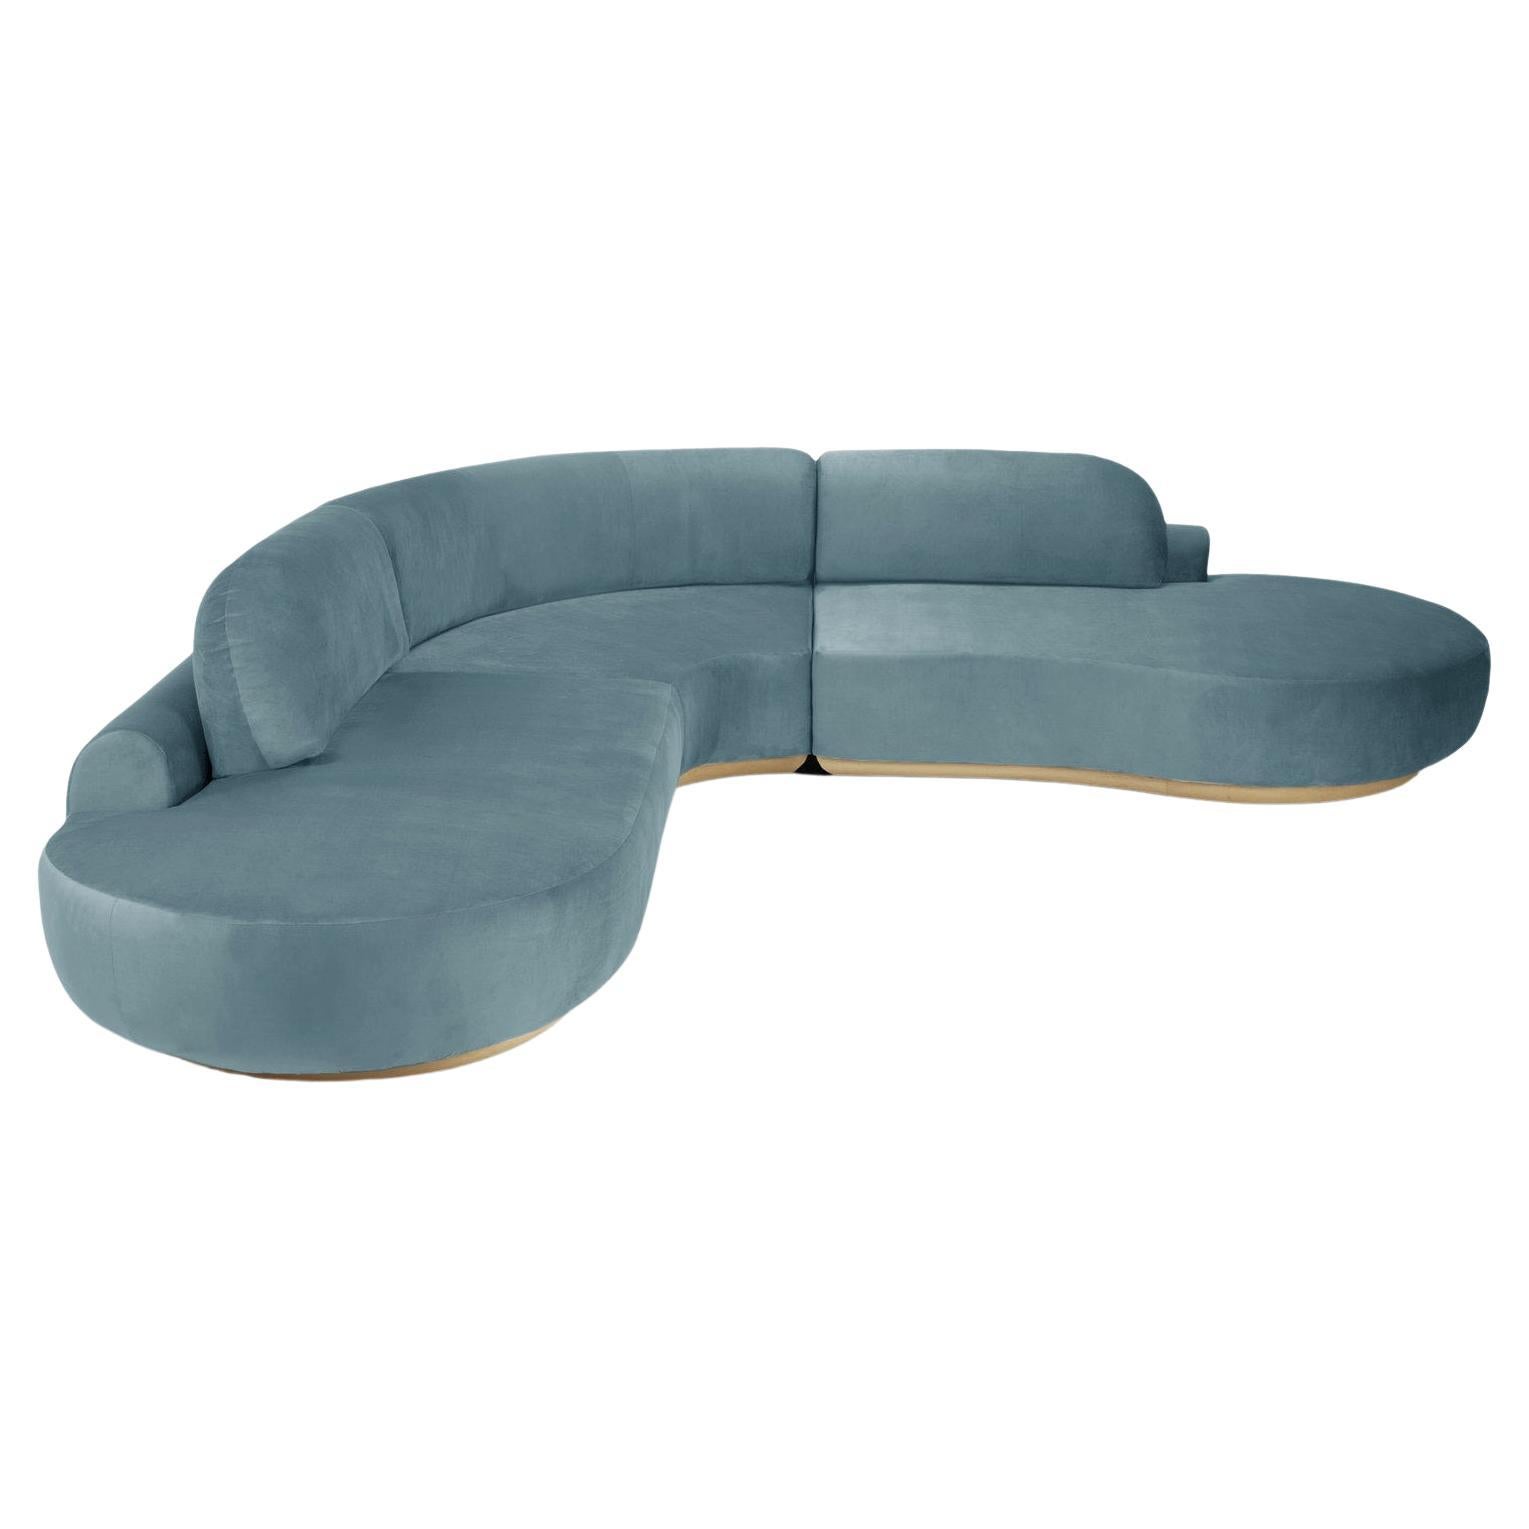 Naked Curved Sectional Sofa, 3 Piece with Natural Oak and Paris Dark Blue For Sale